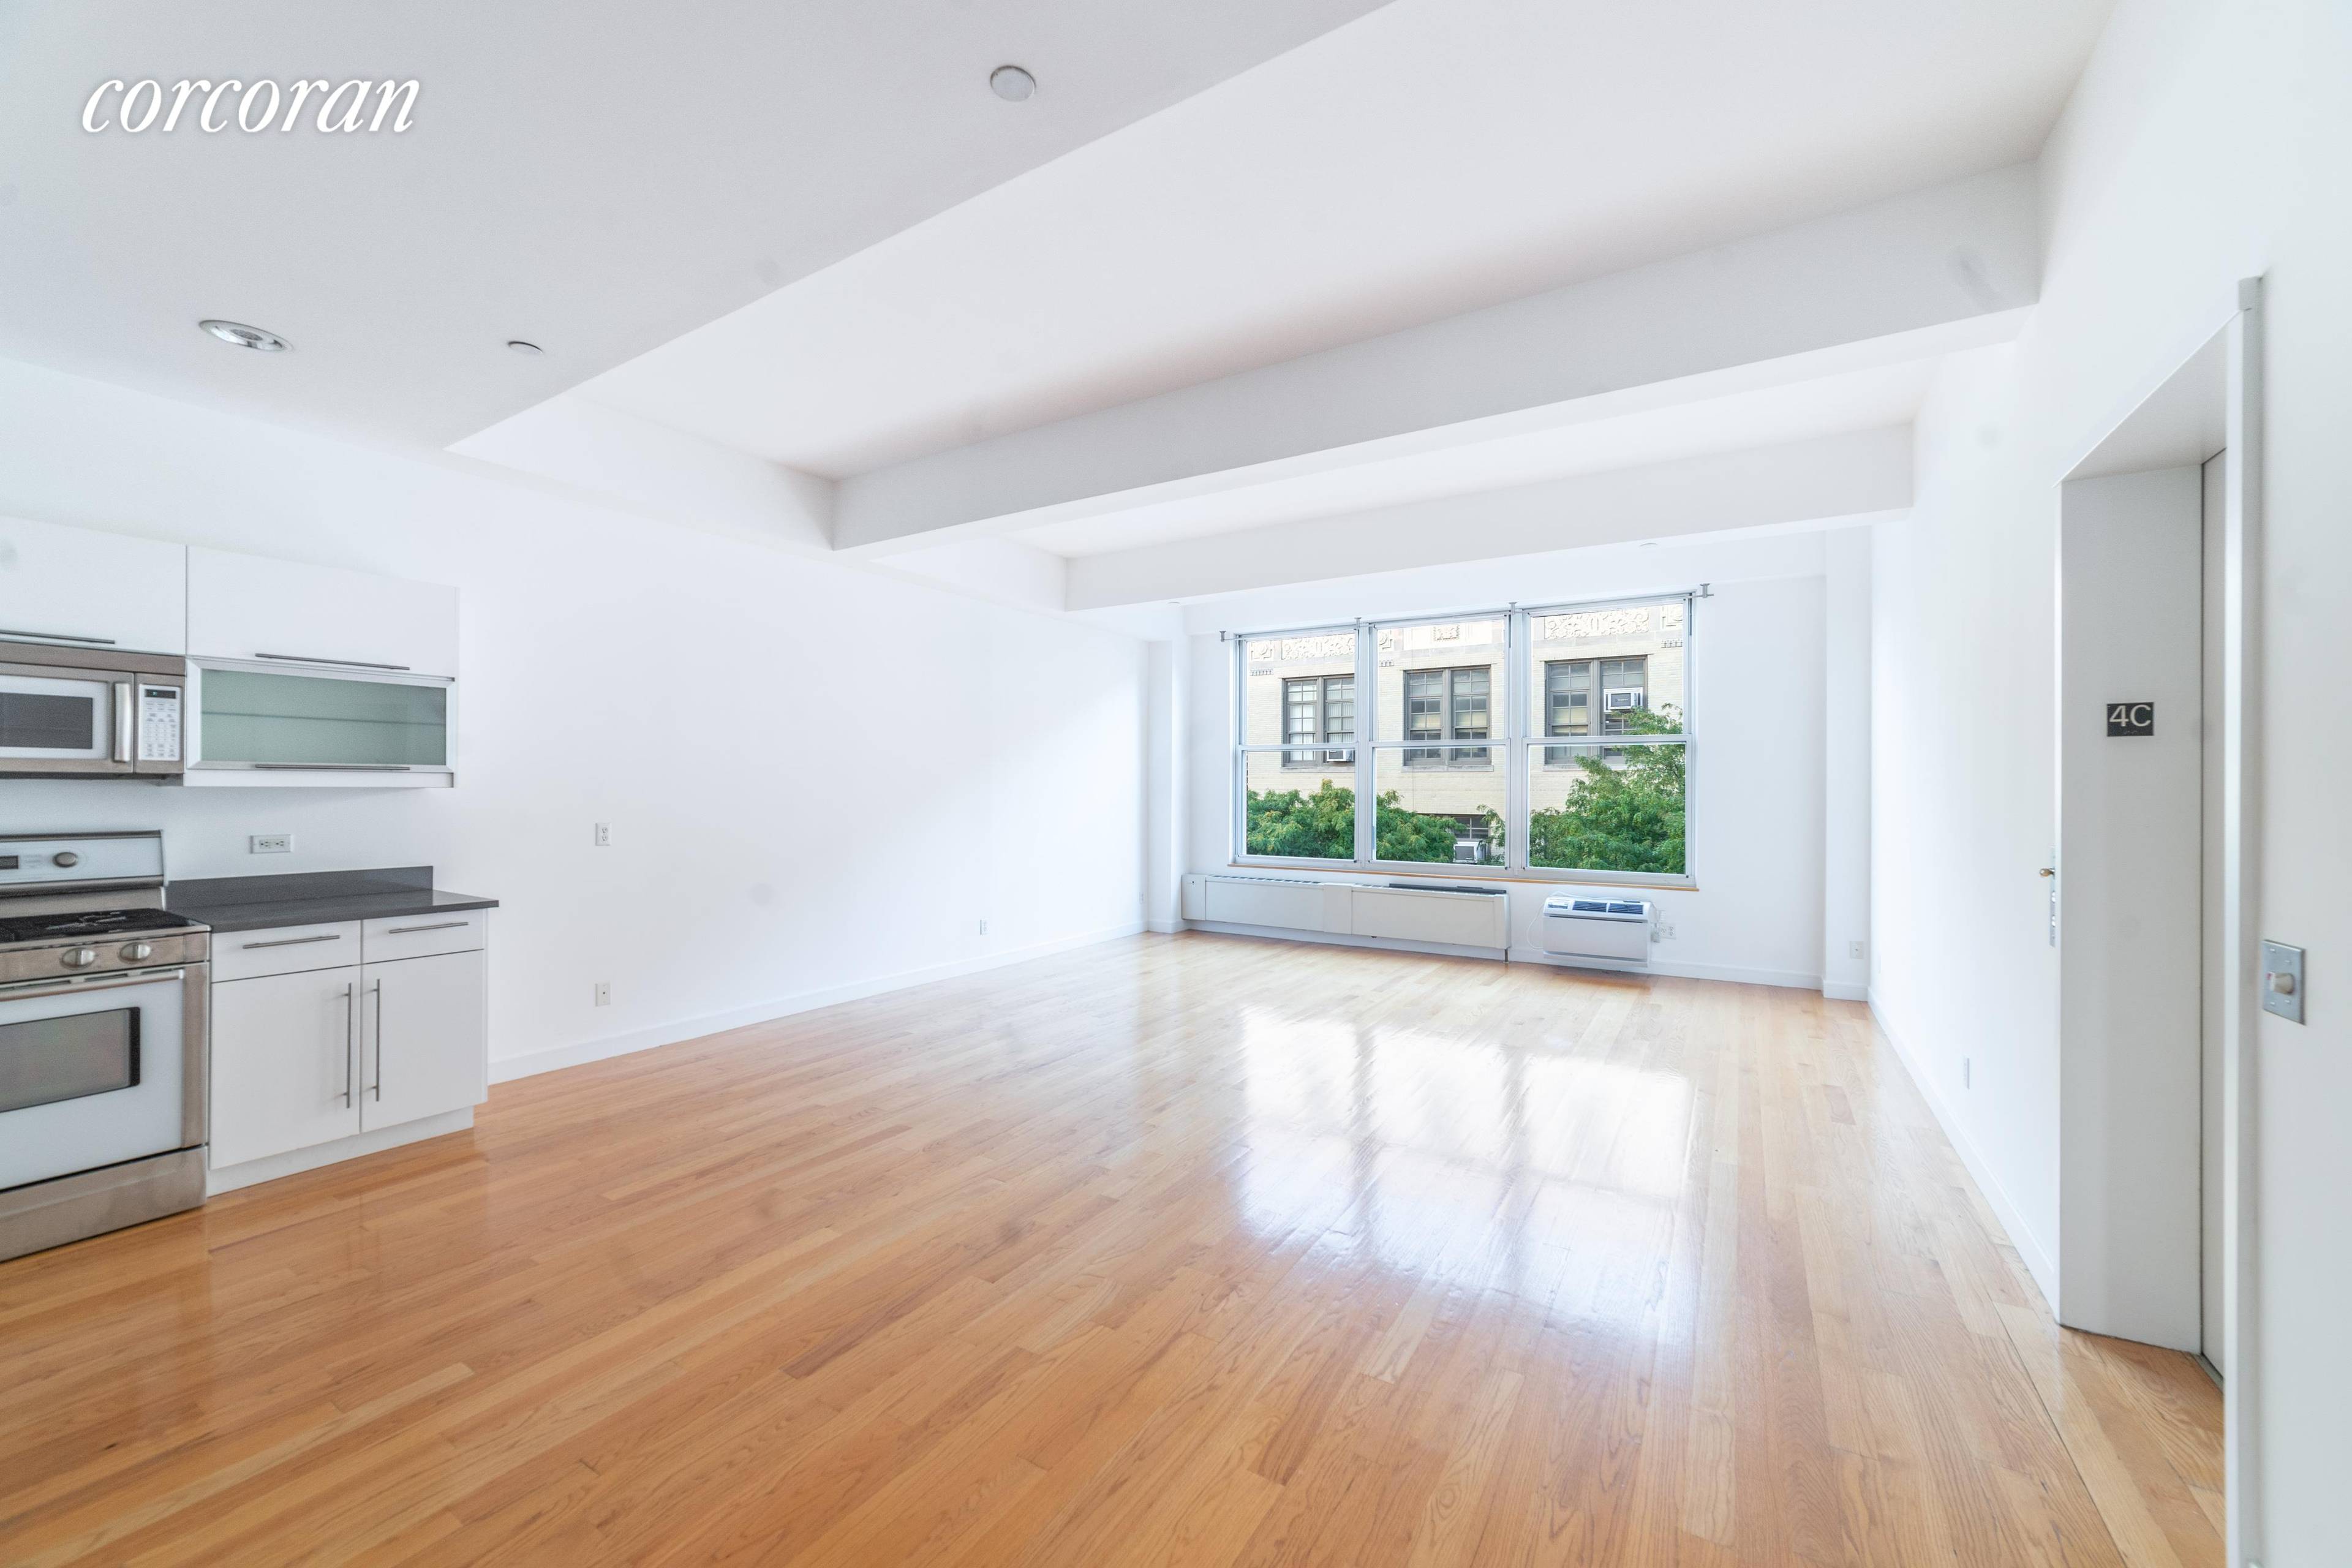 Step out from your privately controlled elevator and enter into this modern and sleek 2 bedroom, 2 bath Boerum Hill oasis this has been the exceptional rental home youA ve ...